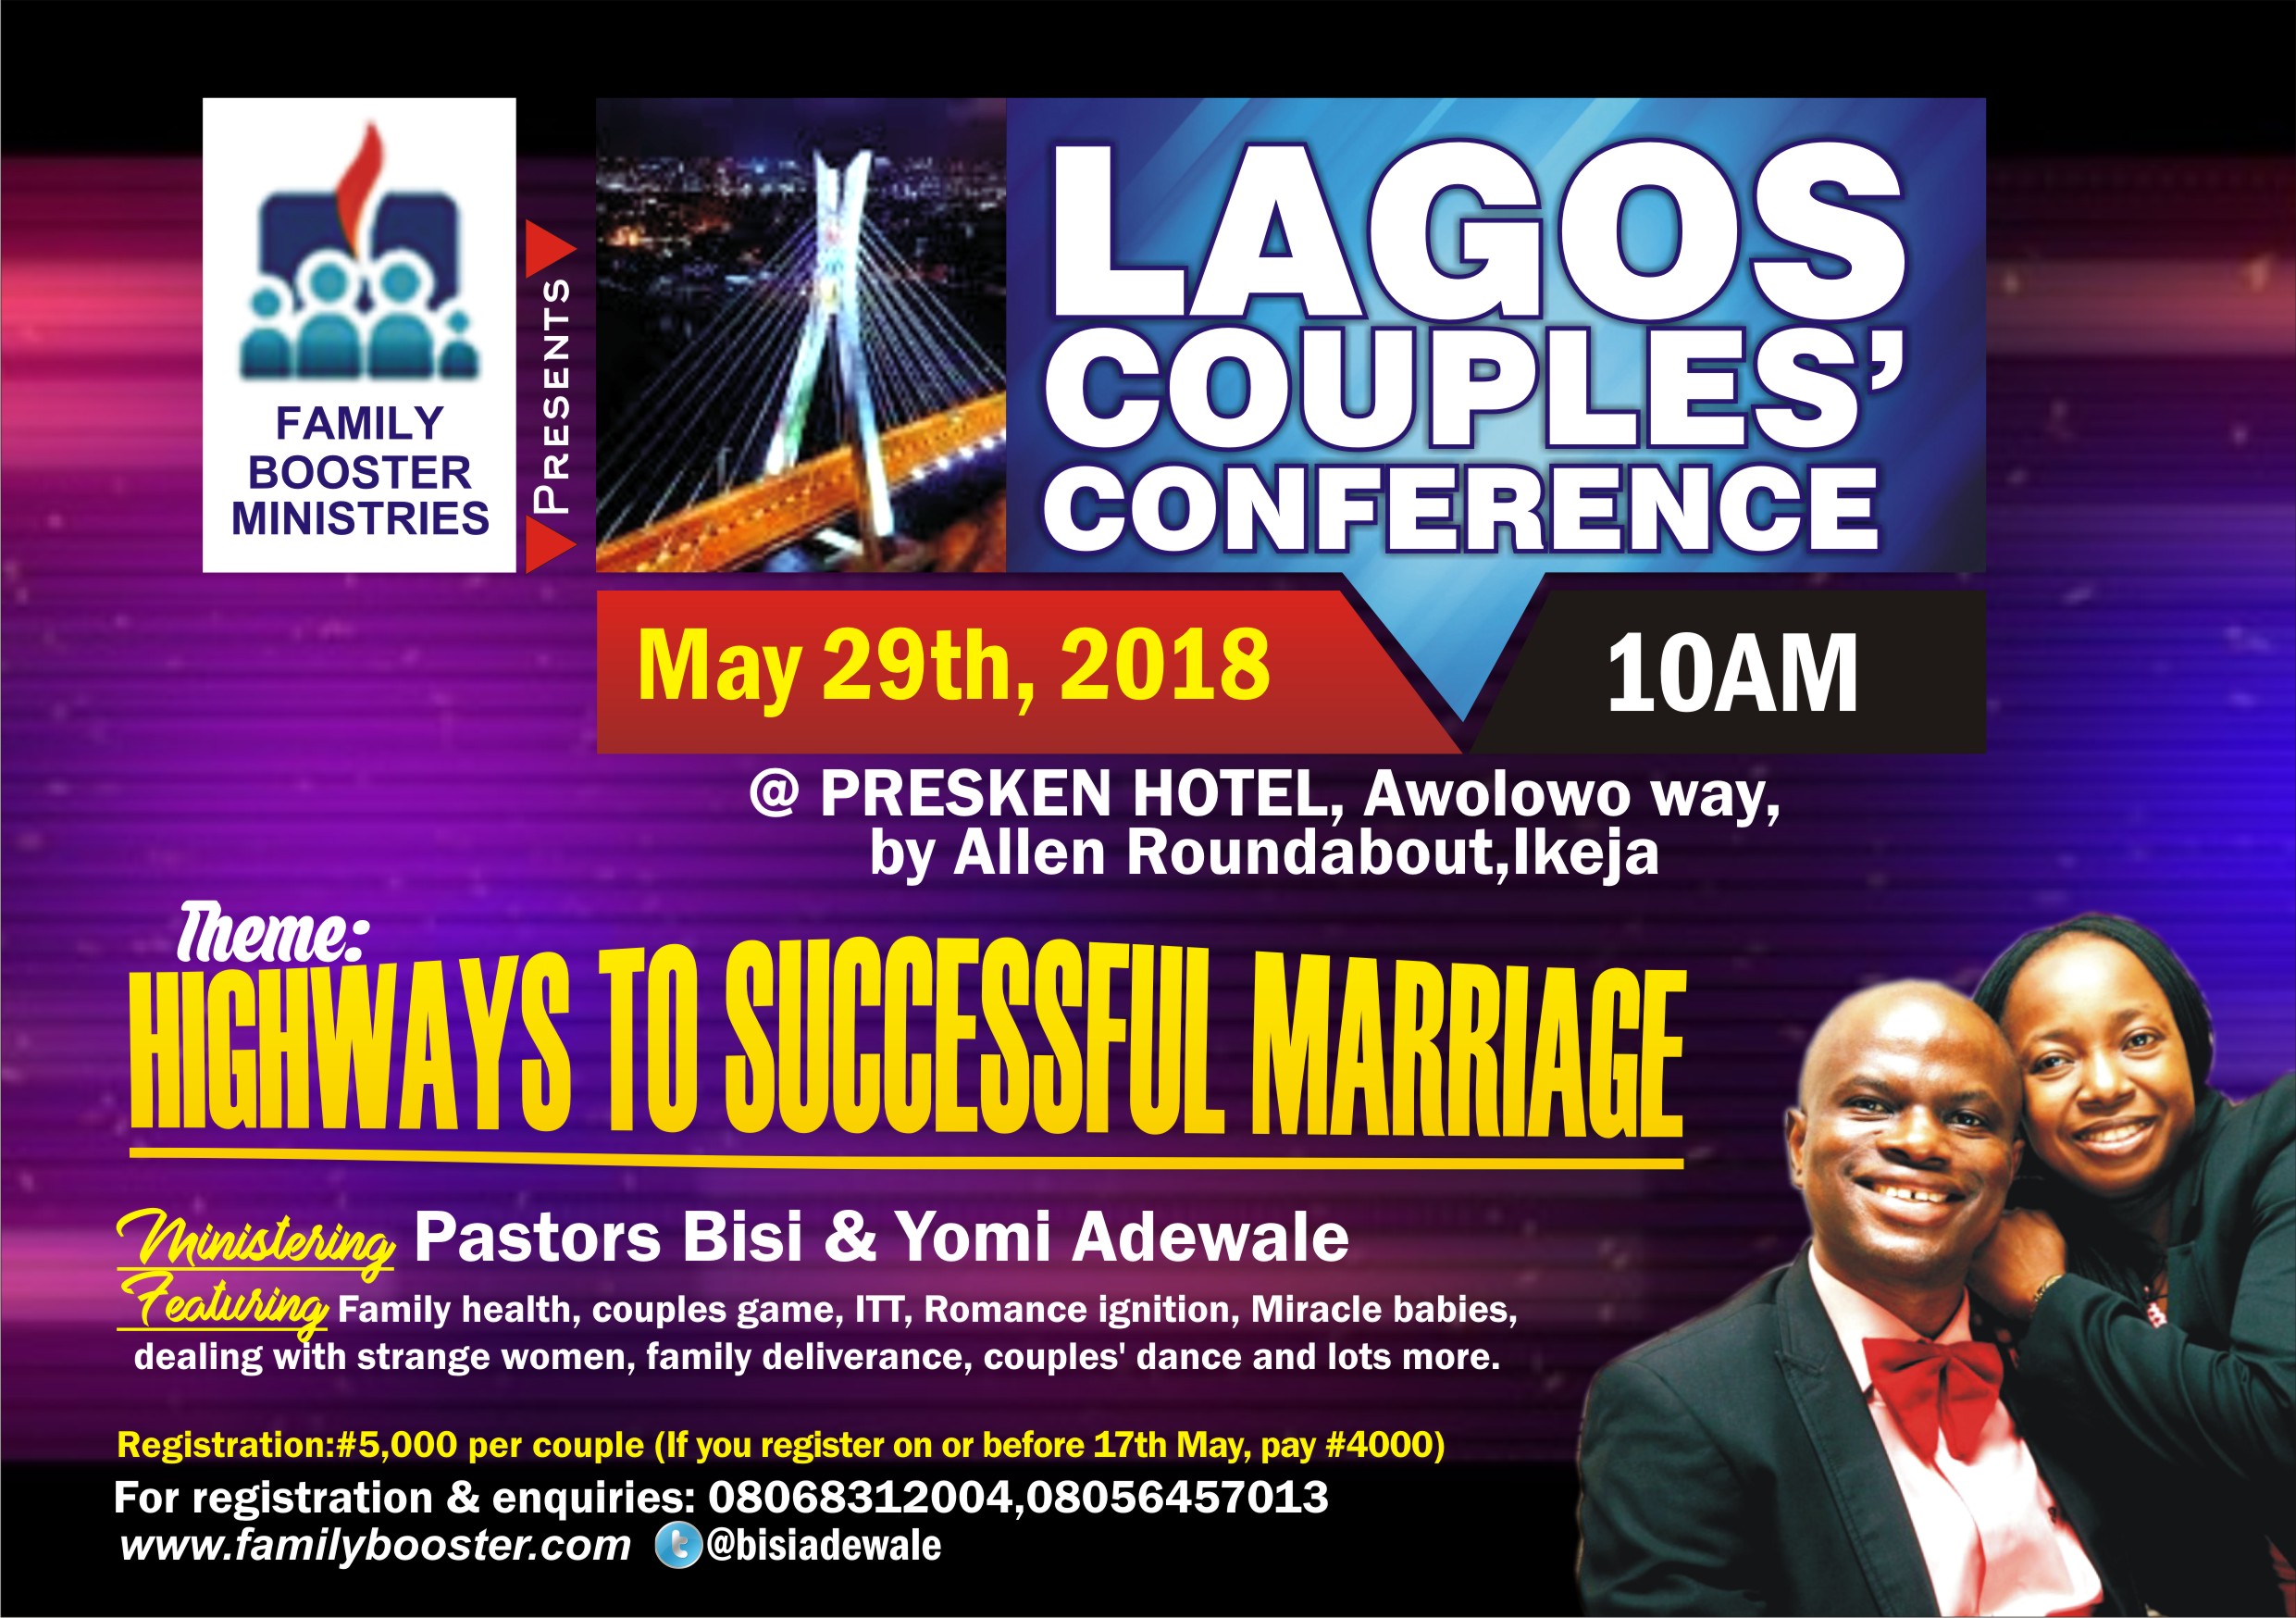 Lagos Couples Conference I